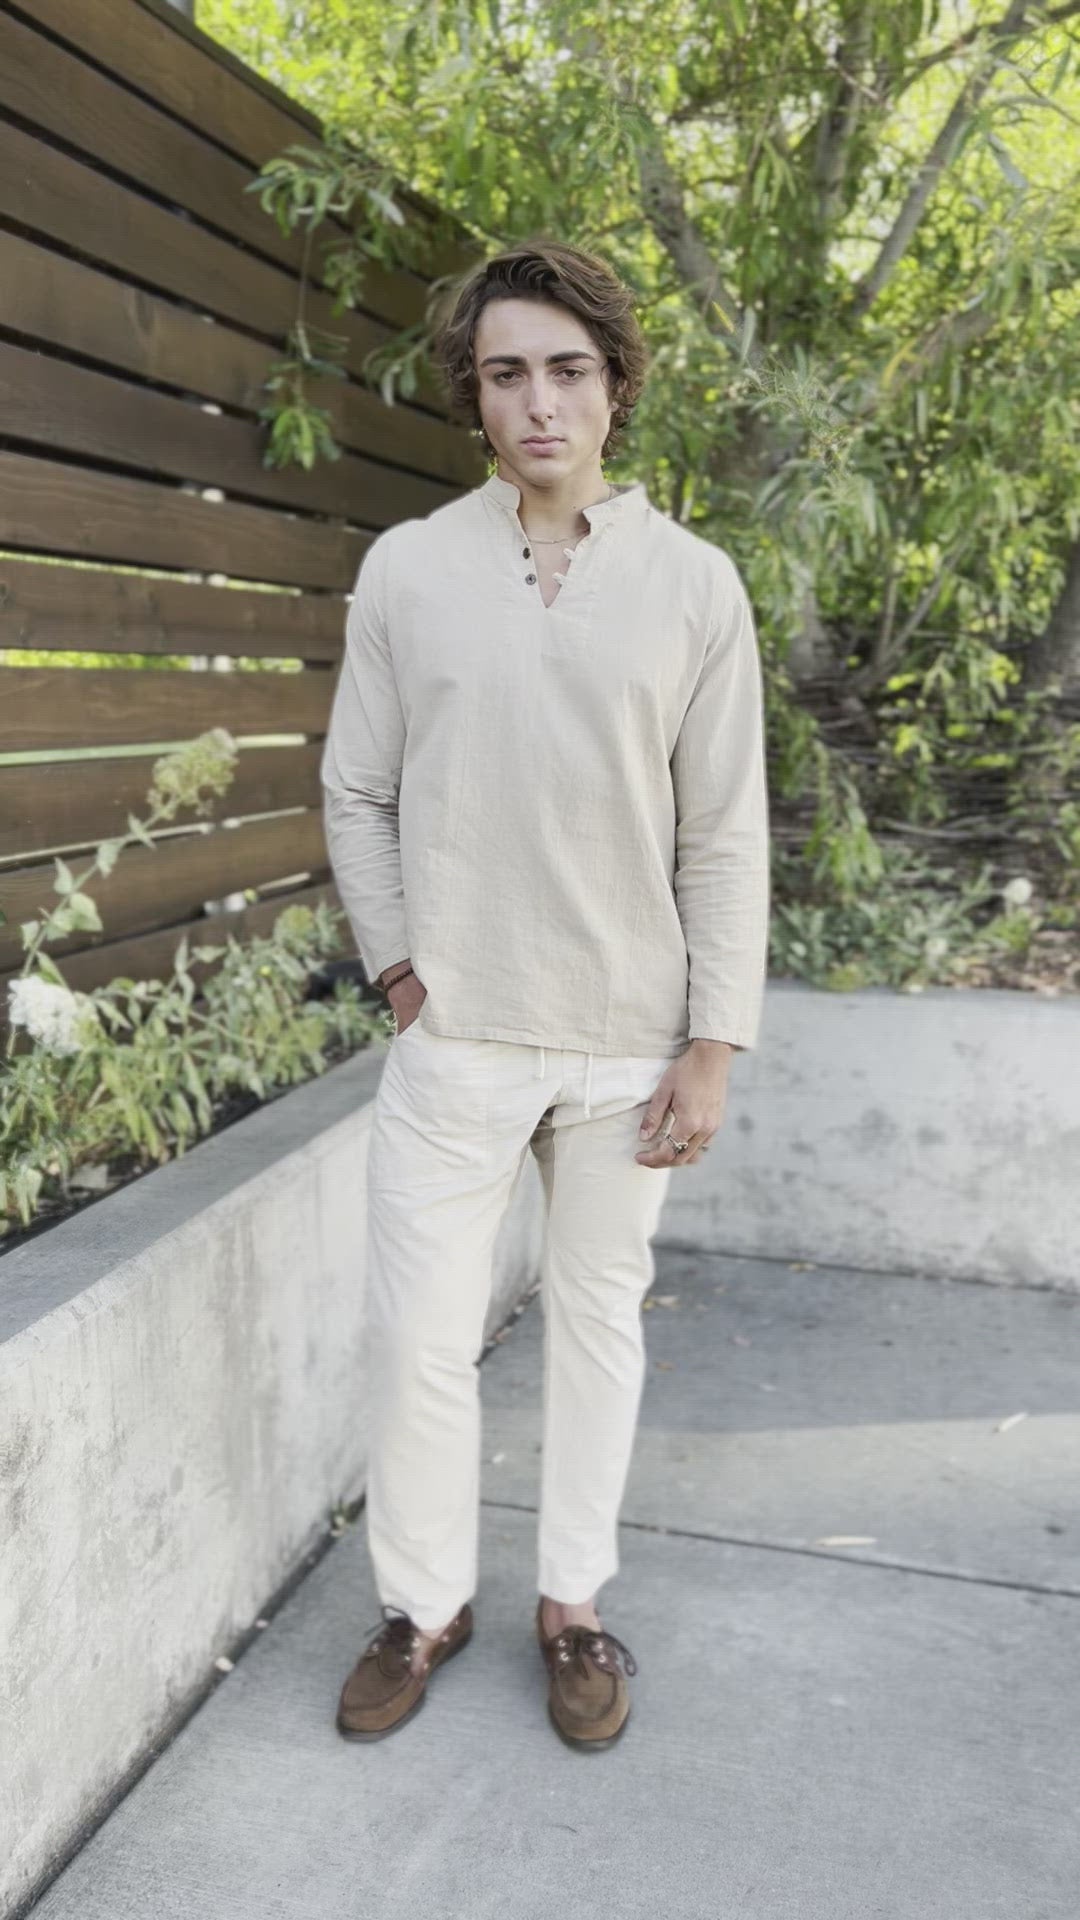 Man shows off natural gauze cotton shirt and un-dyed pants with brown shoes.